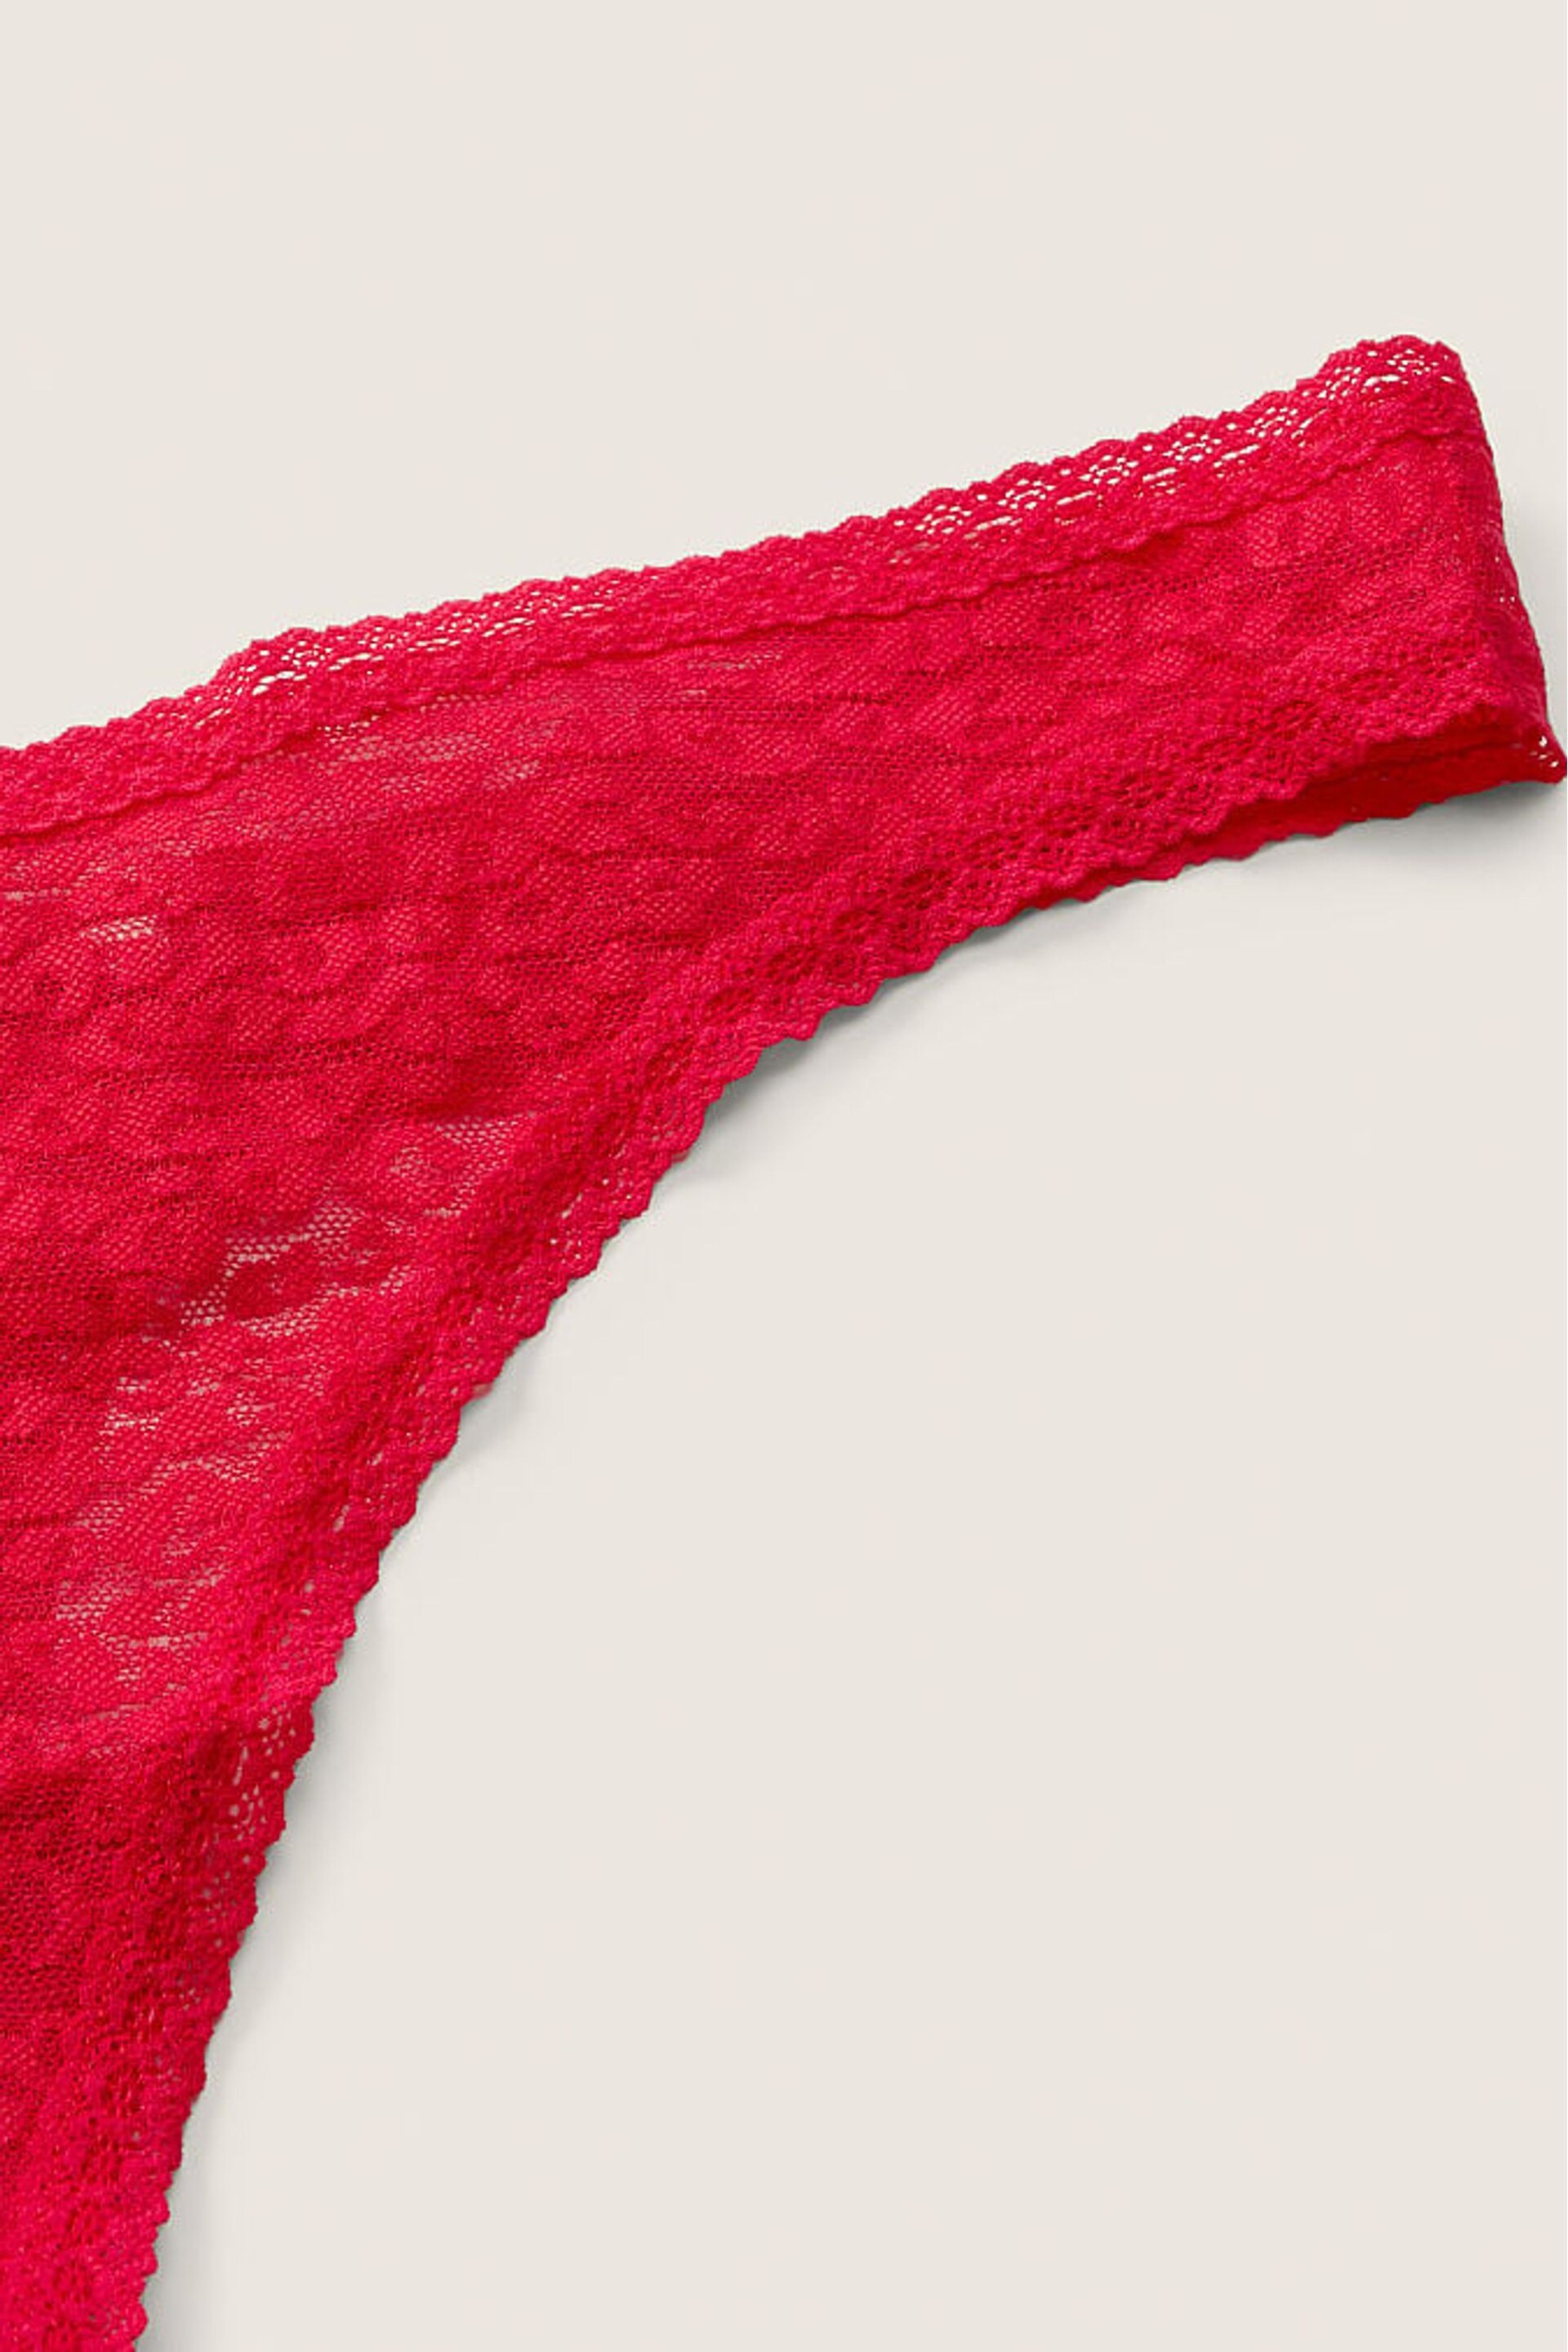 Victoria's Secret PINK Red Pepper Lace Logo Thong Knickers - Image 2 of 2